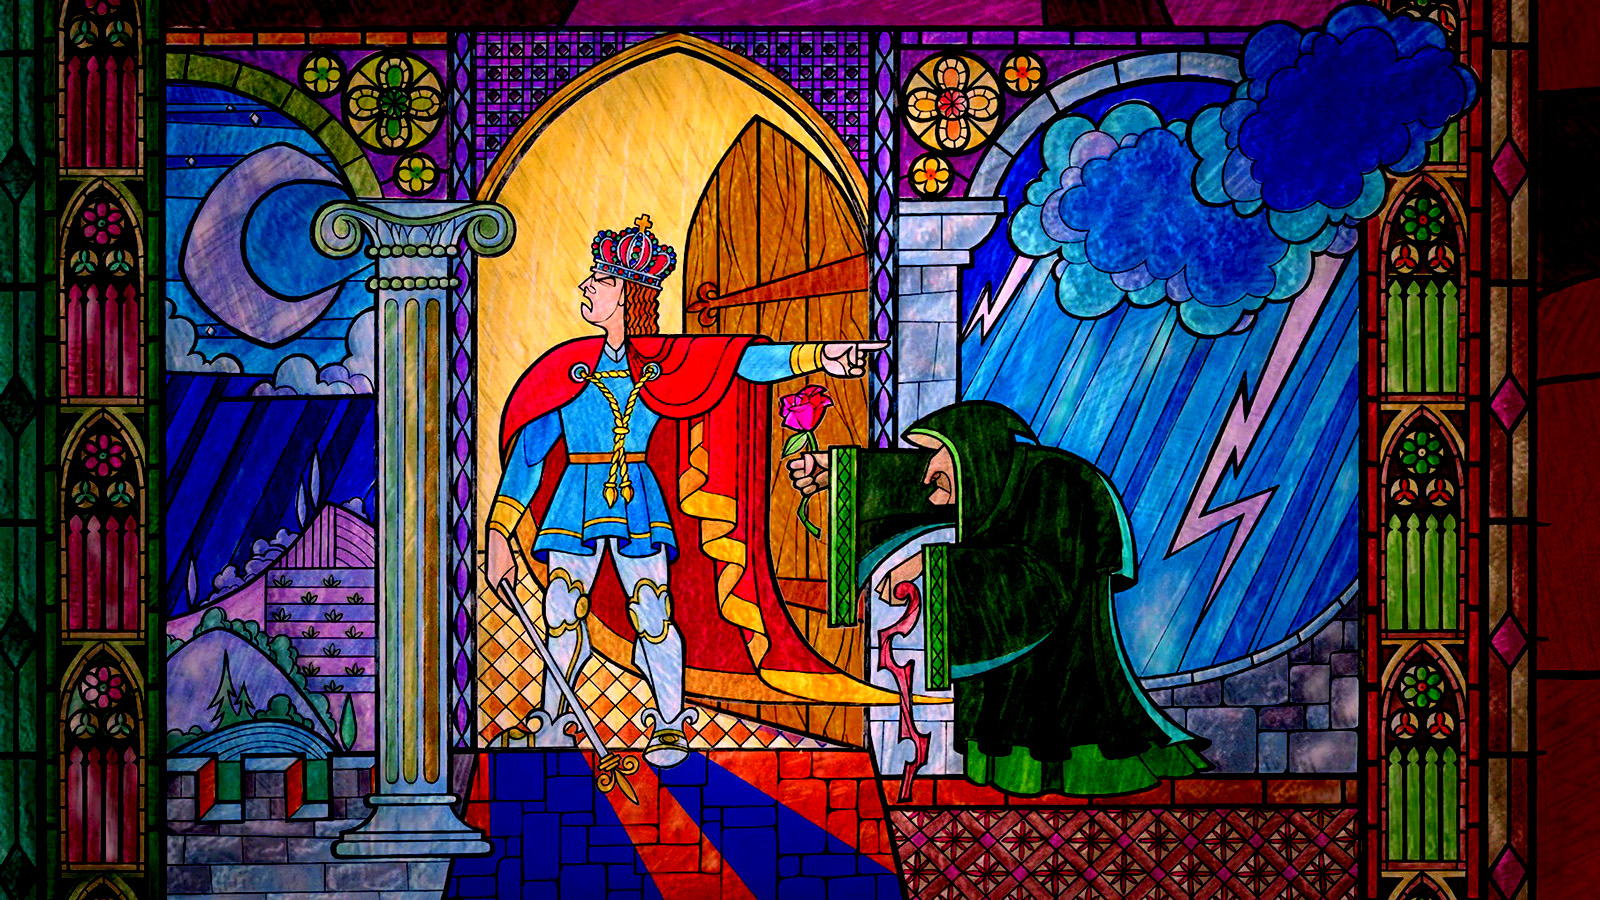 Stained Glass Wallpaper - Beauty and the Beast Wallpaper (39325697) - Fanpop